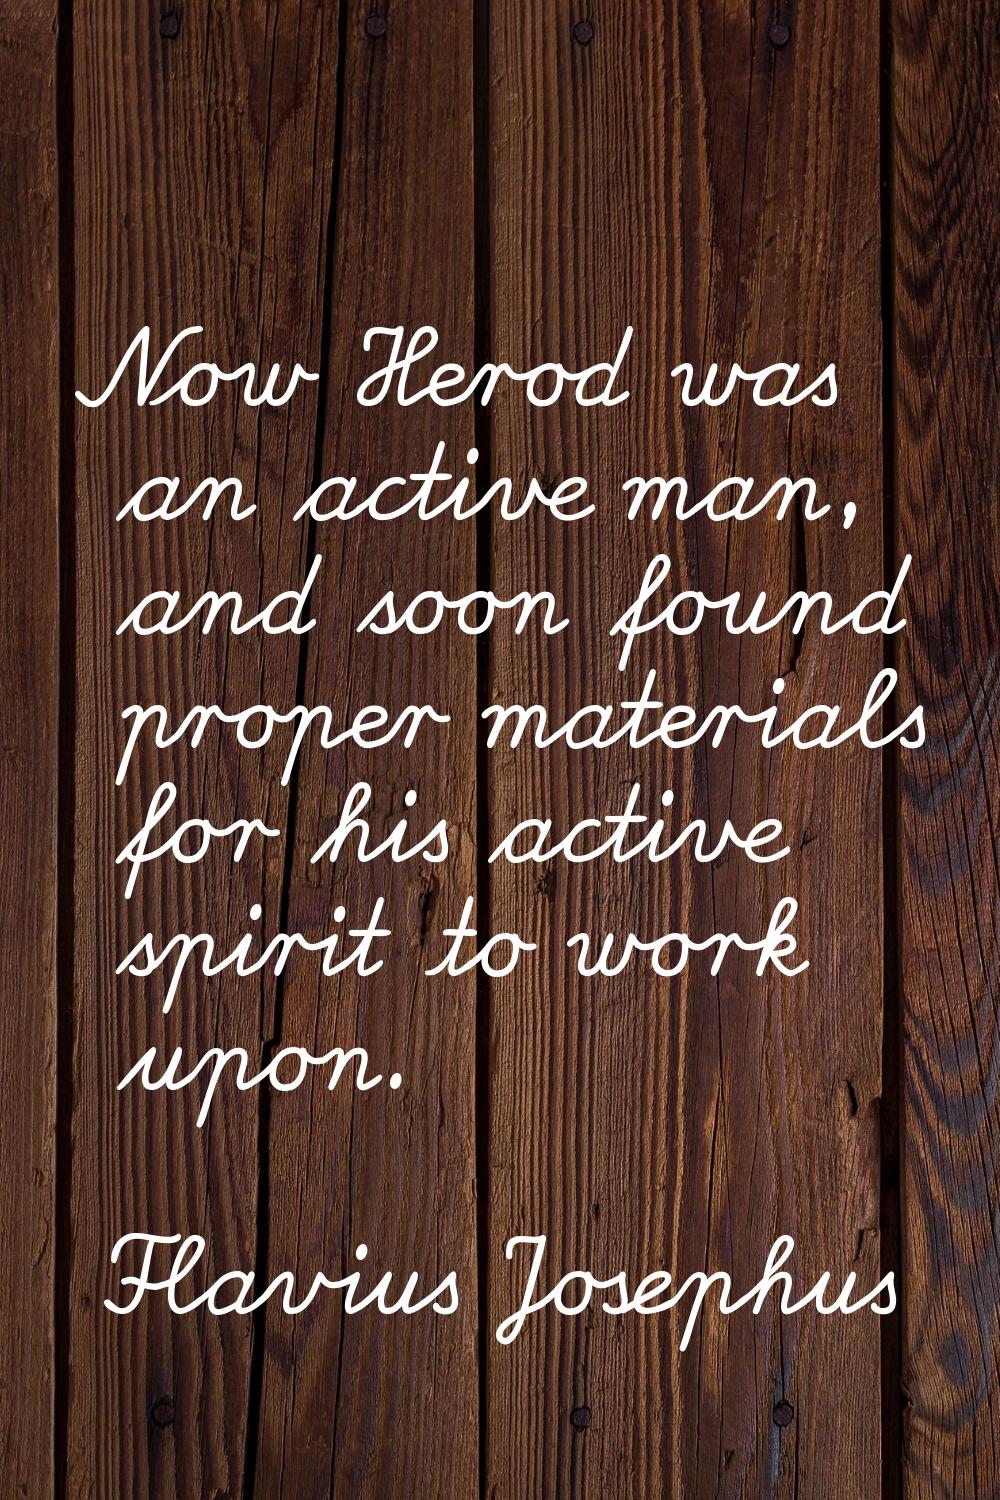 Now Herod was an active man, and soon found proper materials for his active spirit to work upon.